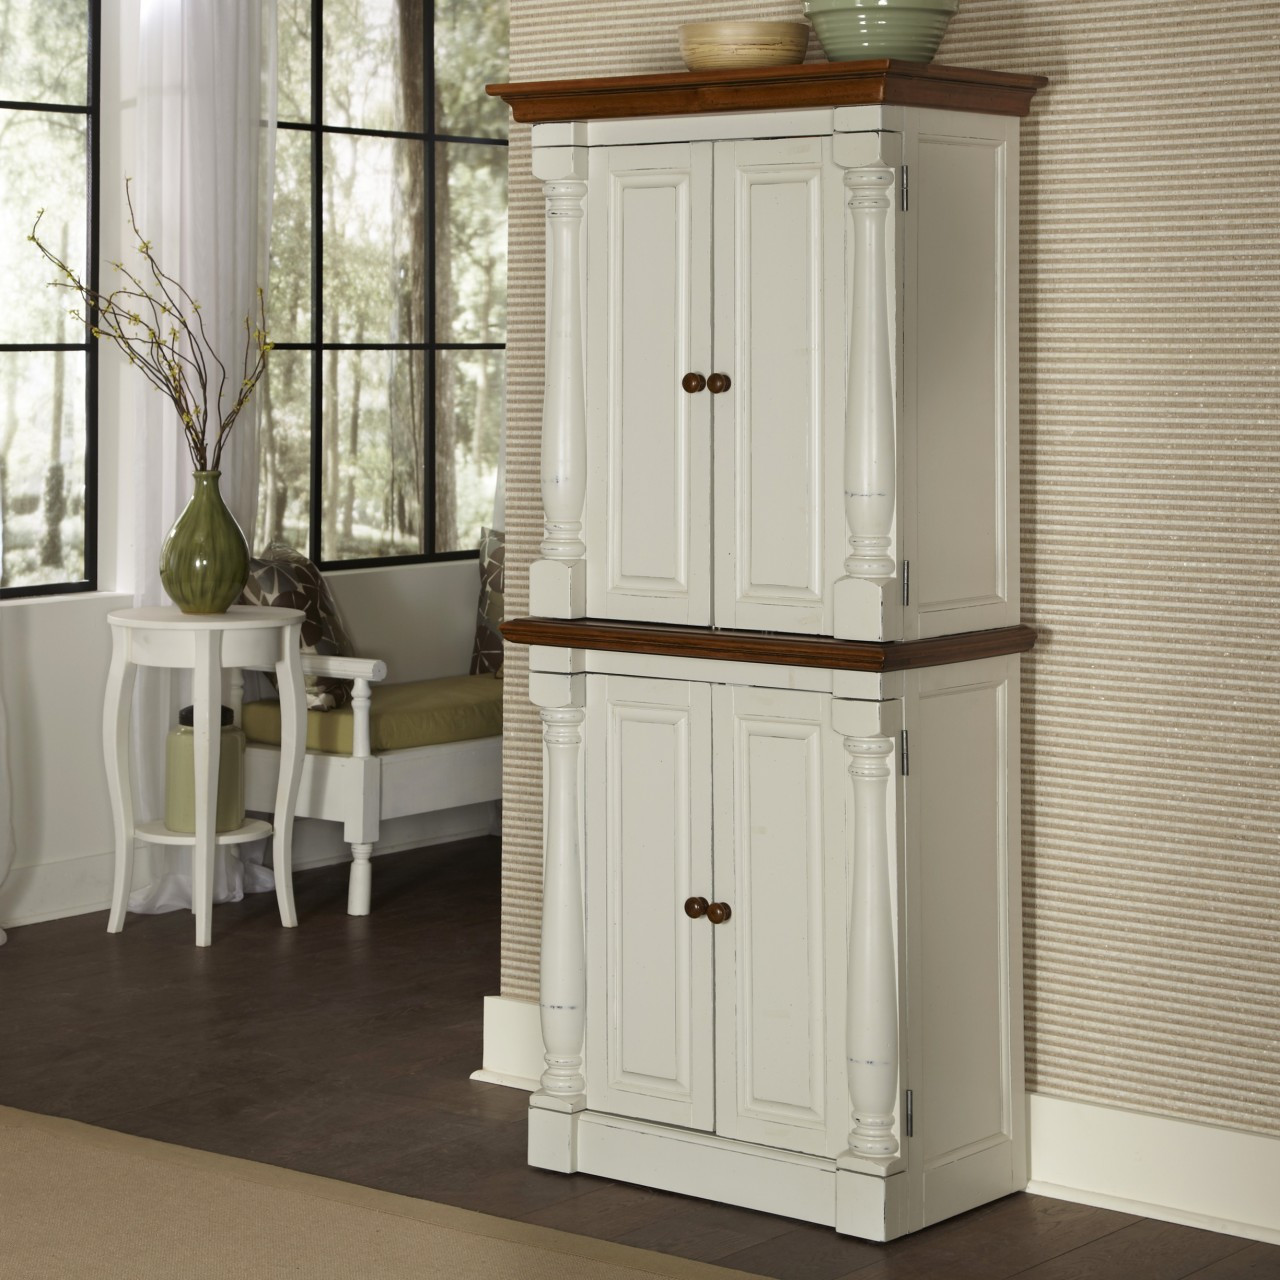 White Pantry Cabinets For Kitchen
 Integrating White Kitchen Pantry Cabinet for Your Storage